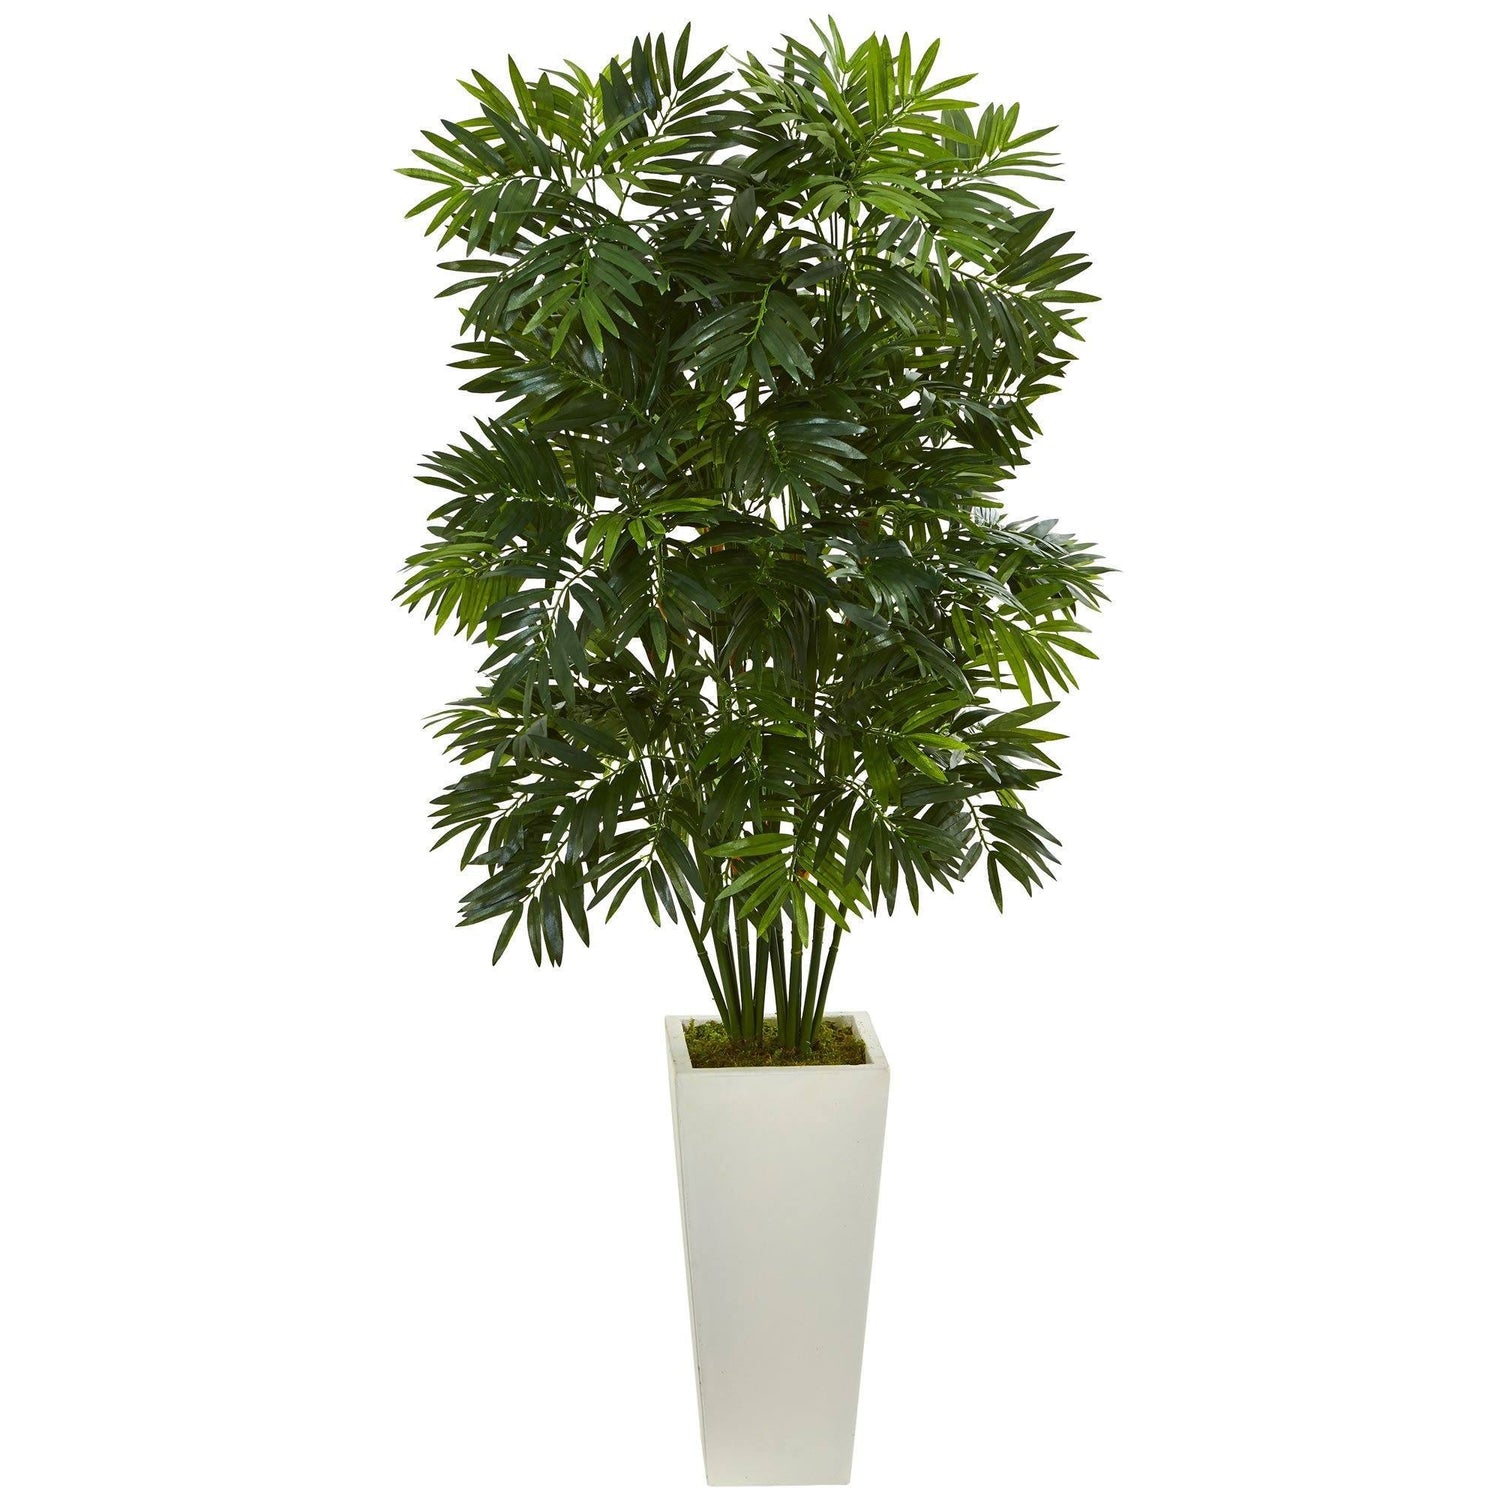 49” Mini Bamboo Palm Artificial Pant in White Tower Planter